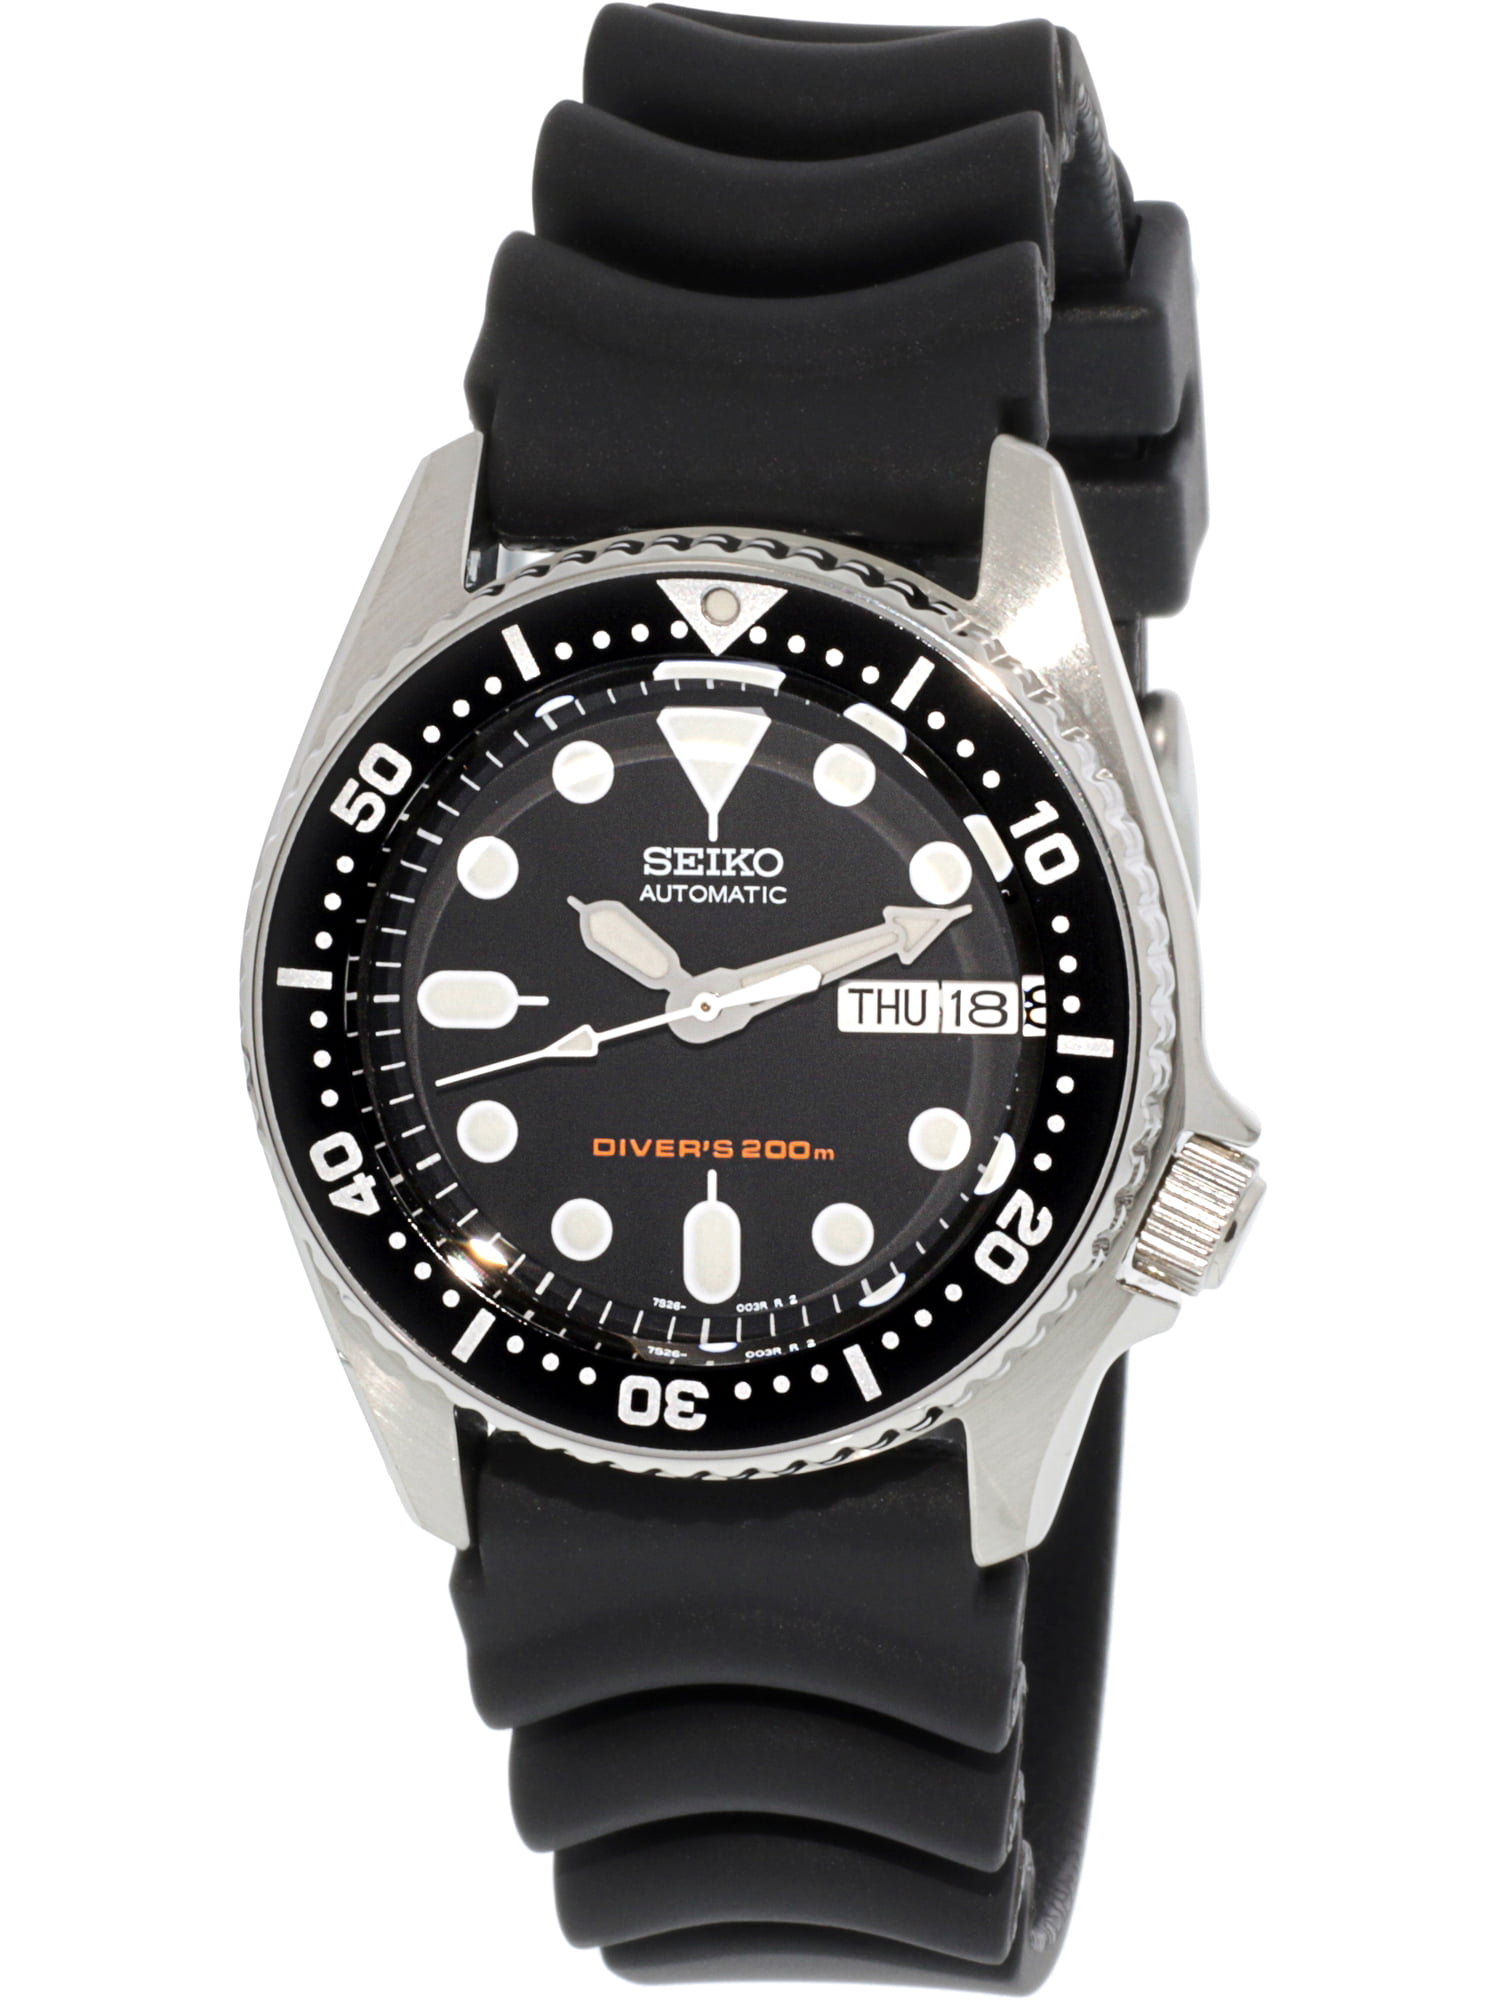 Race Divers Watches -- Find Out Precisely why They may be Water Resilient Not Waterproof Prior to You Buy!